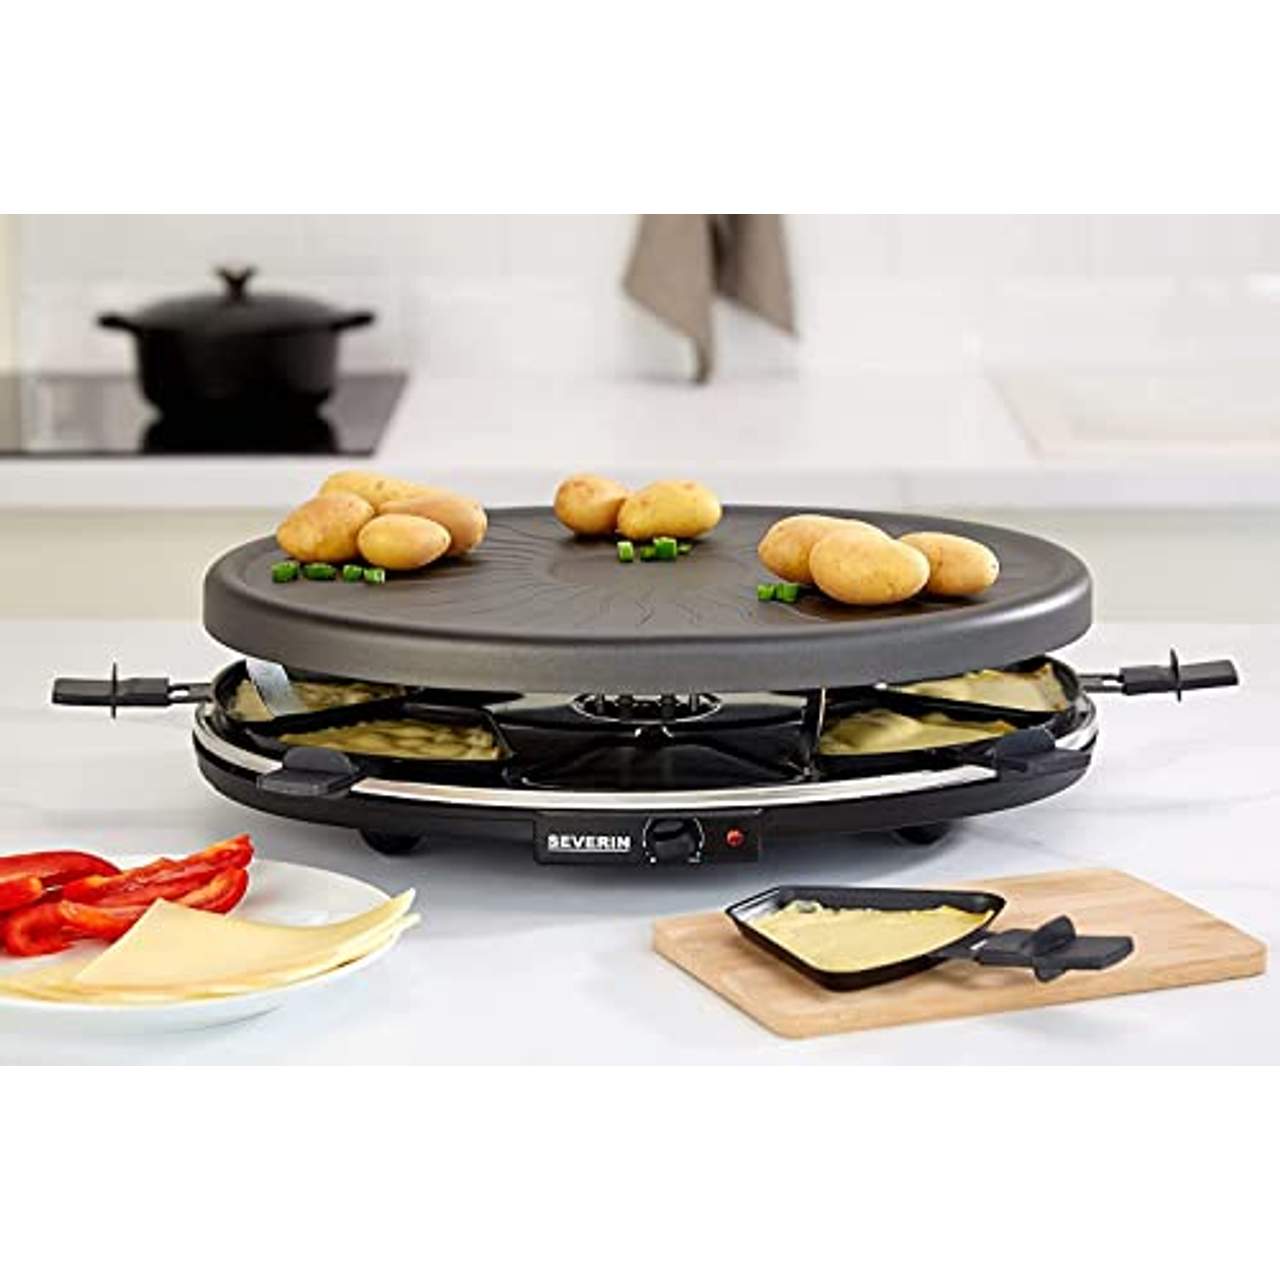 SEVERIN Raclette-Partygrill 